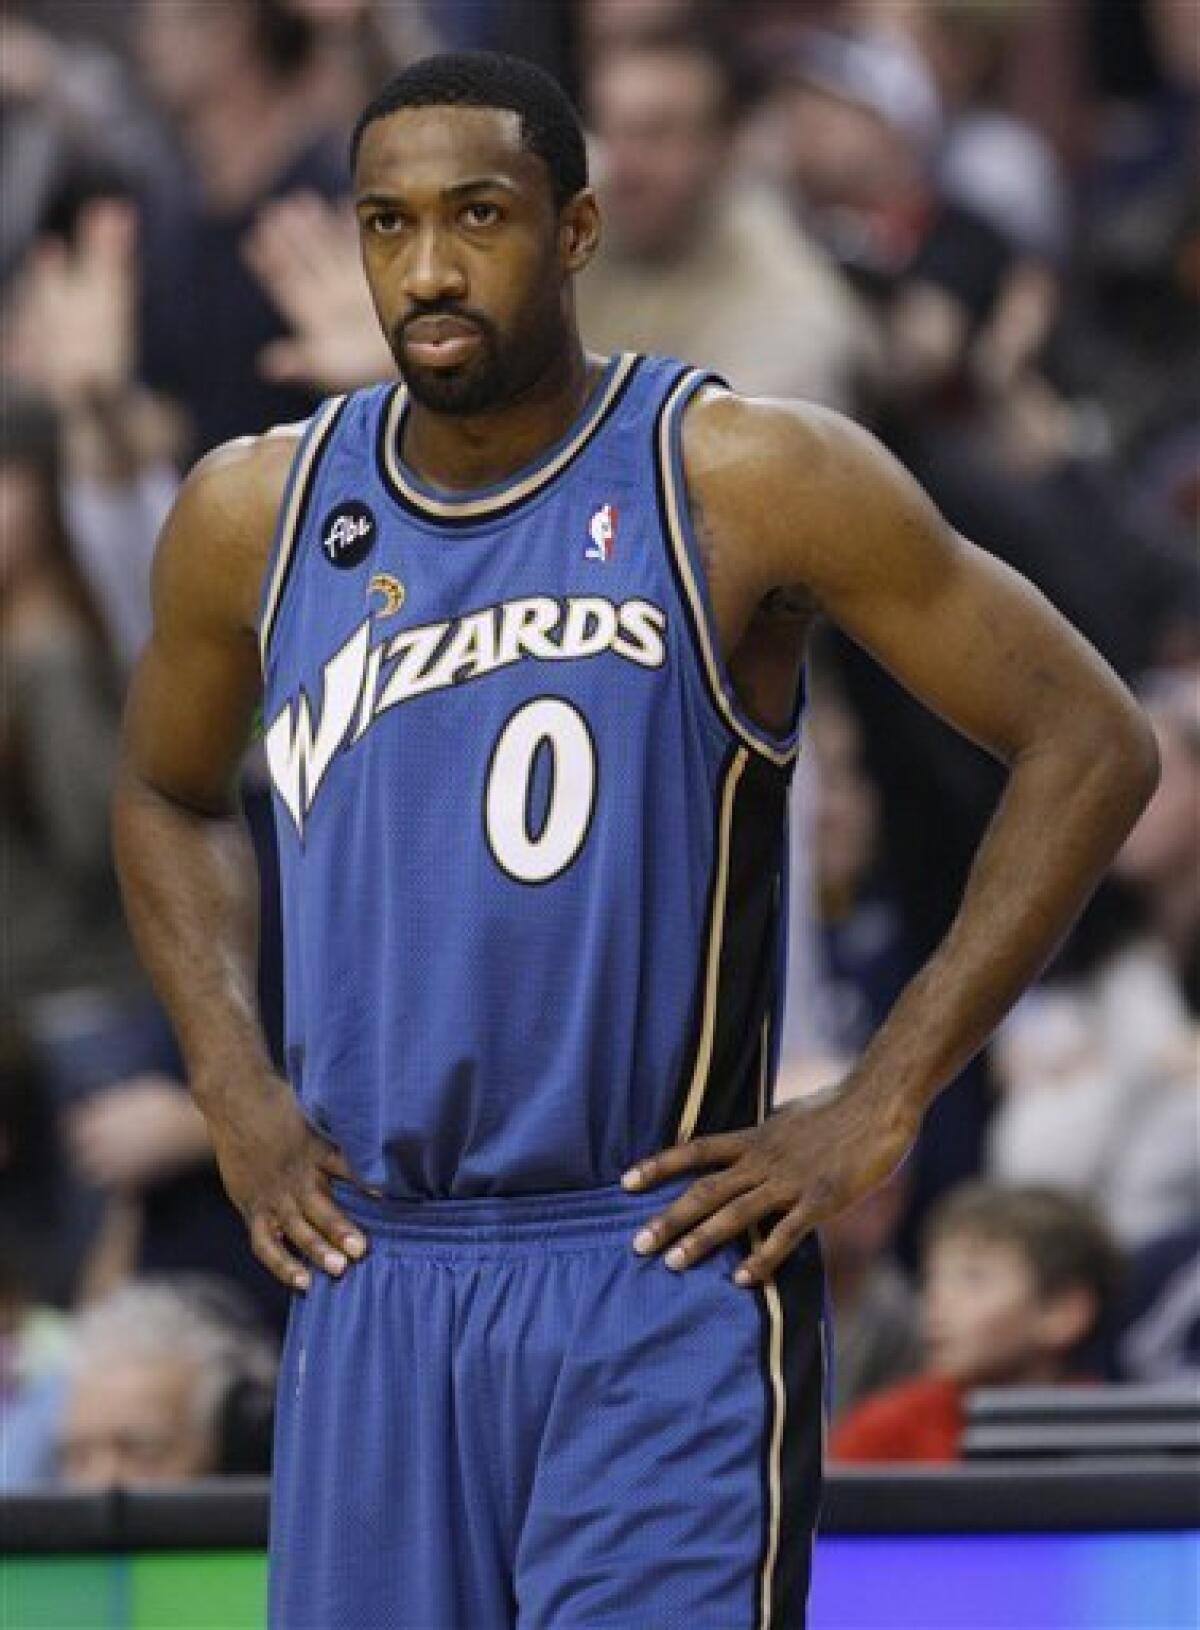 Gilbert Arenas takes serious approach to Media Day, a season after